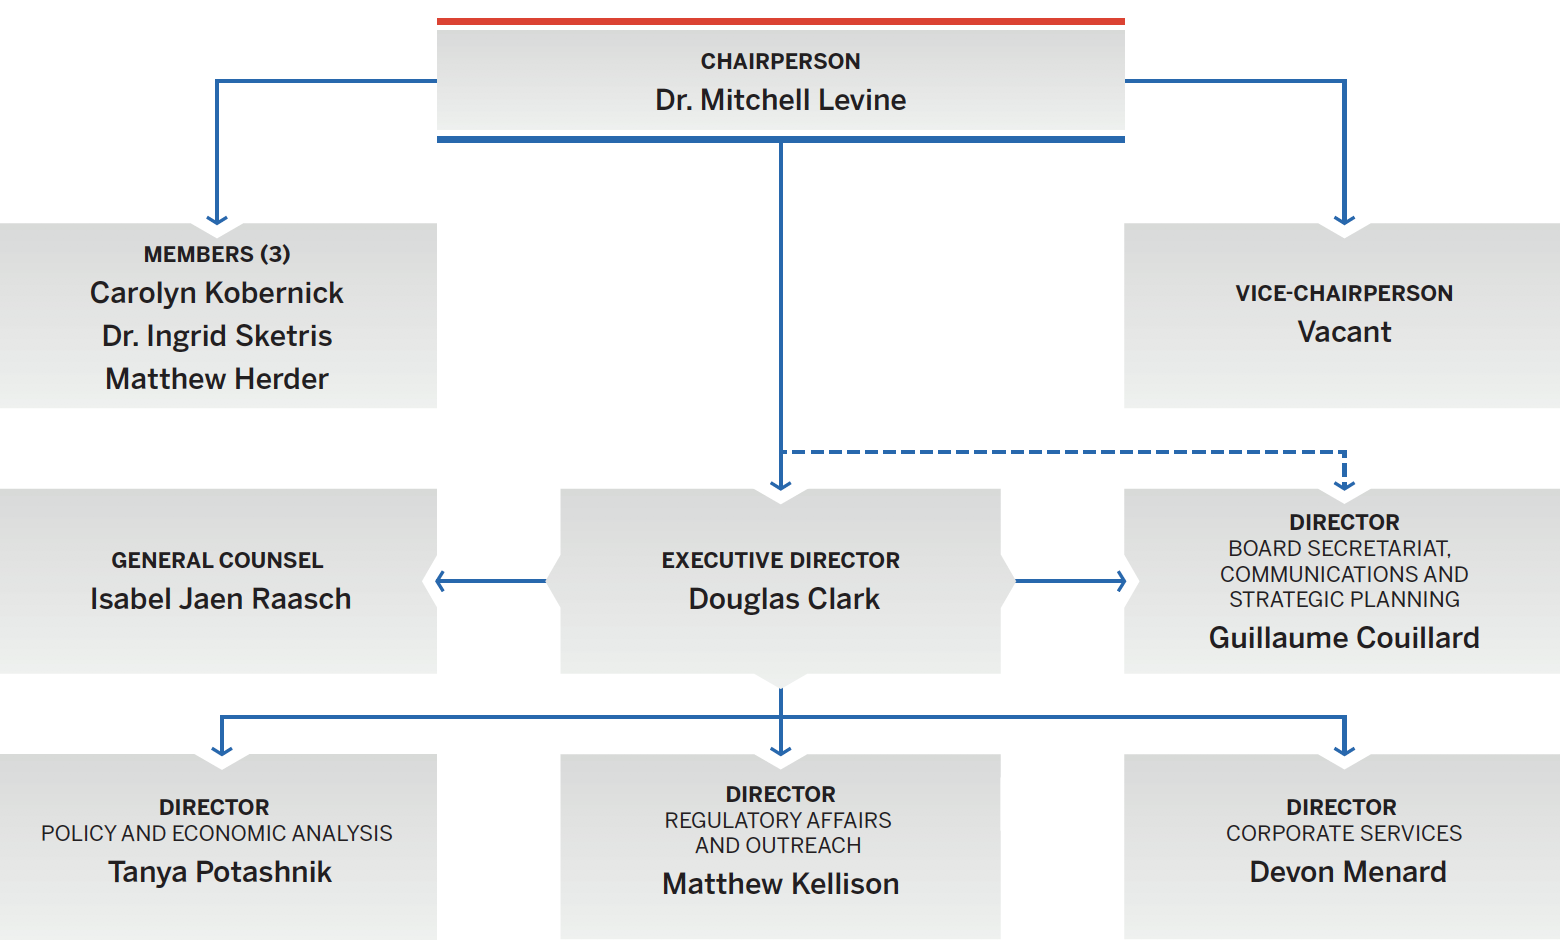 Patented Medicine Prices Review Board Organizational Chart